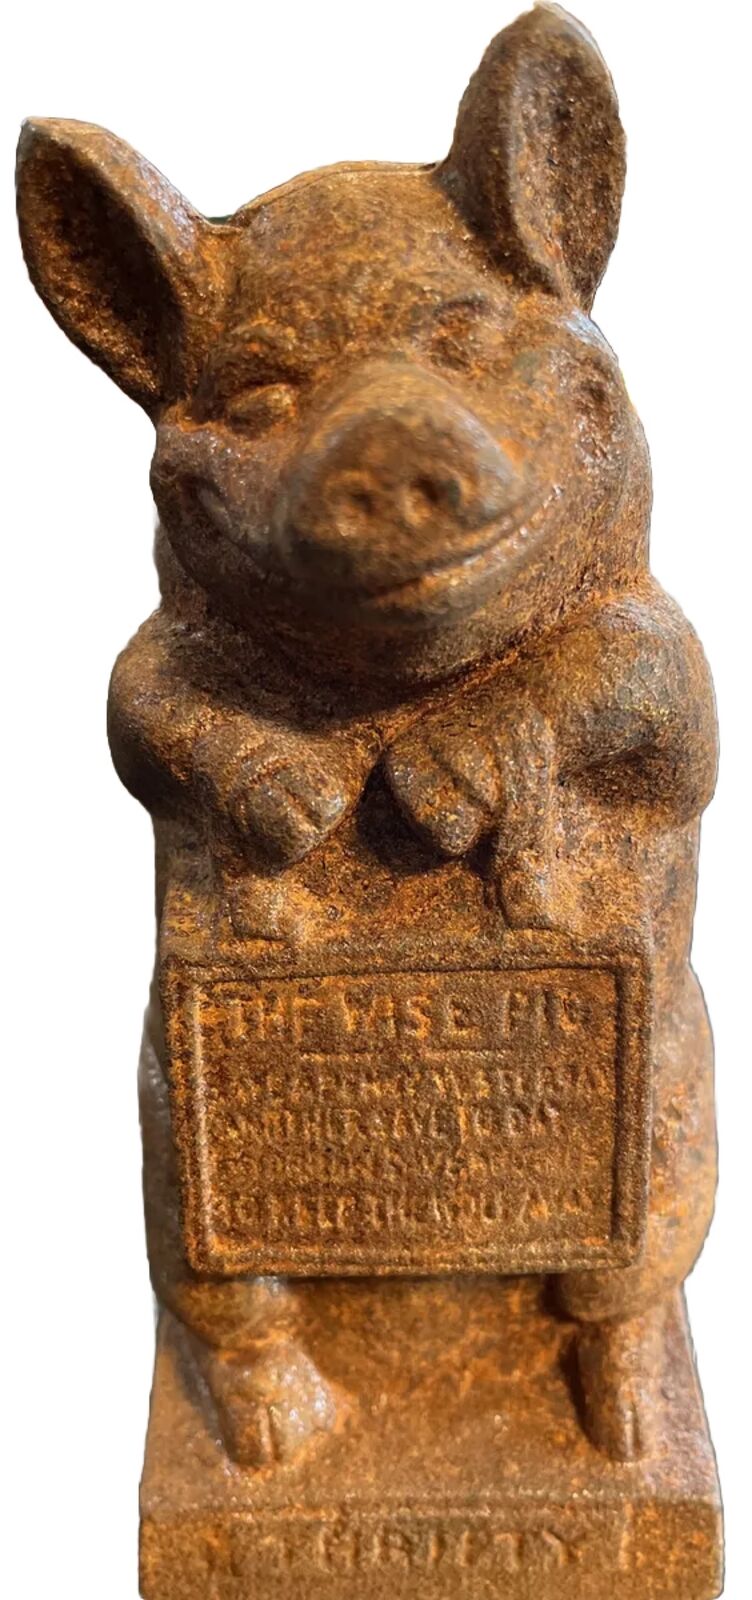 Vintage Cast Iron Piggy Bank Thrifty The Wise Pig Still Coin Bank